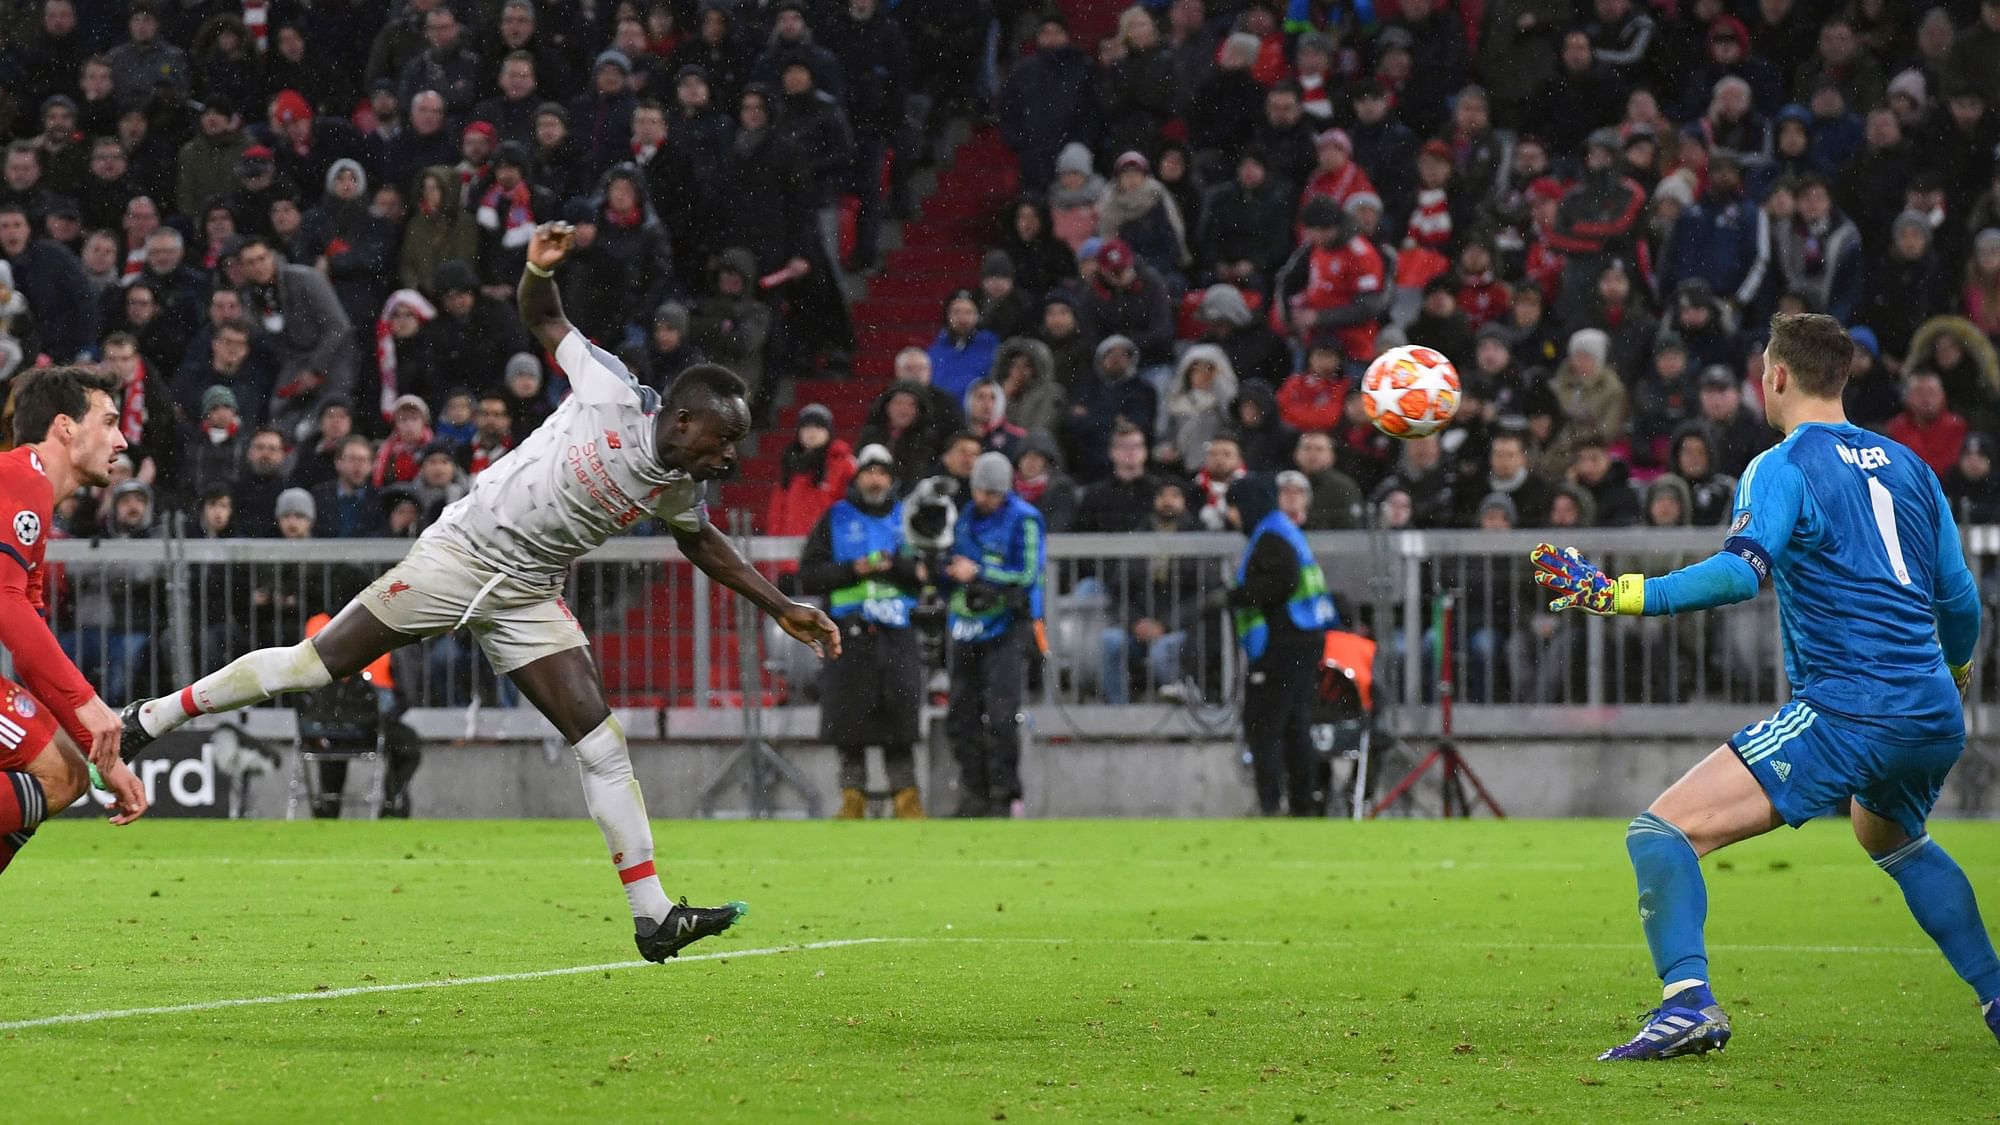 Liverpool midfielder Sadio Mane, second left, scores his side’s third goal during the Champions League round of 16 second leg match between Bayern Munich and Liverpool at the Allianz Arena, in Munich.tin Joensson)